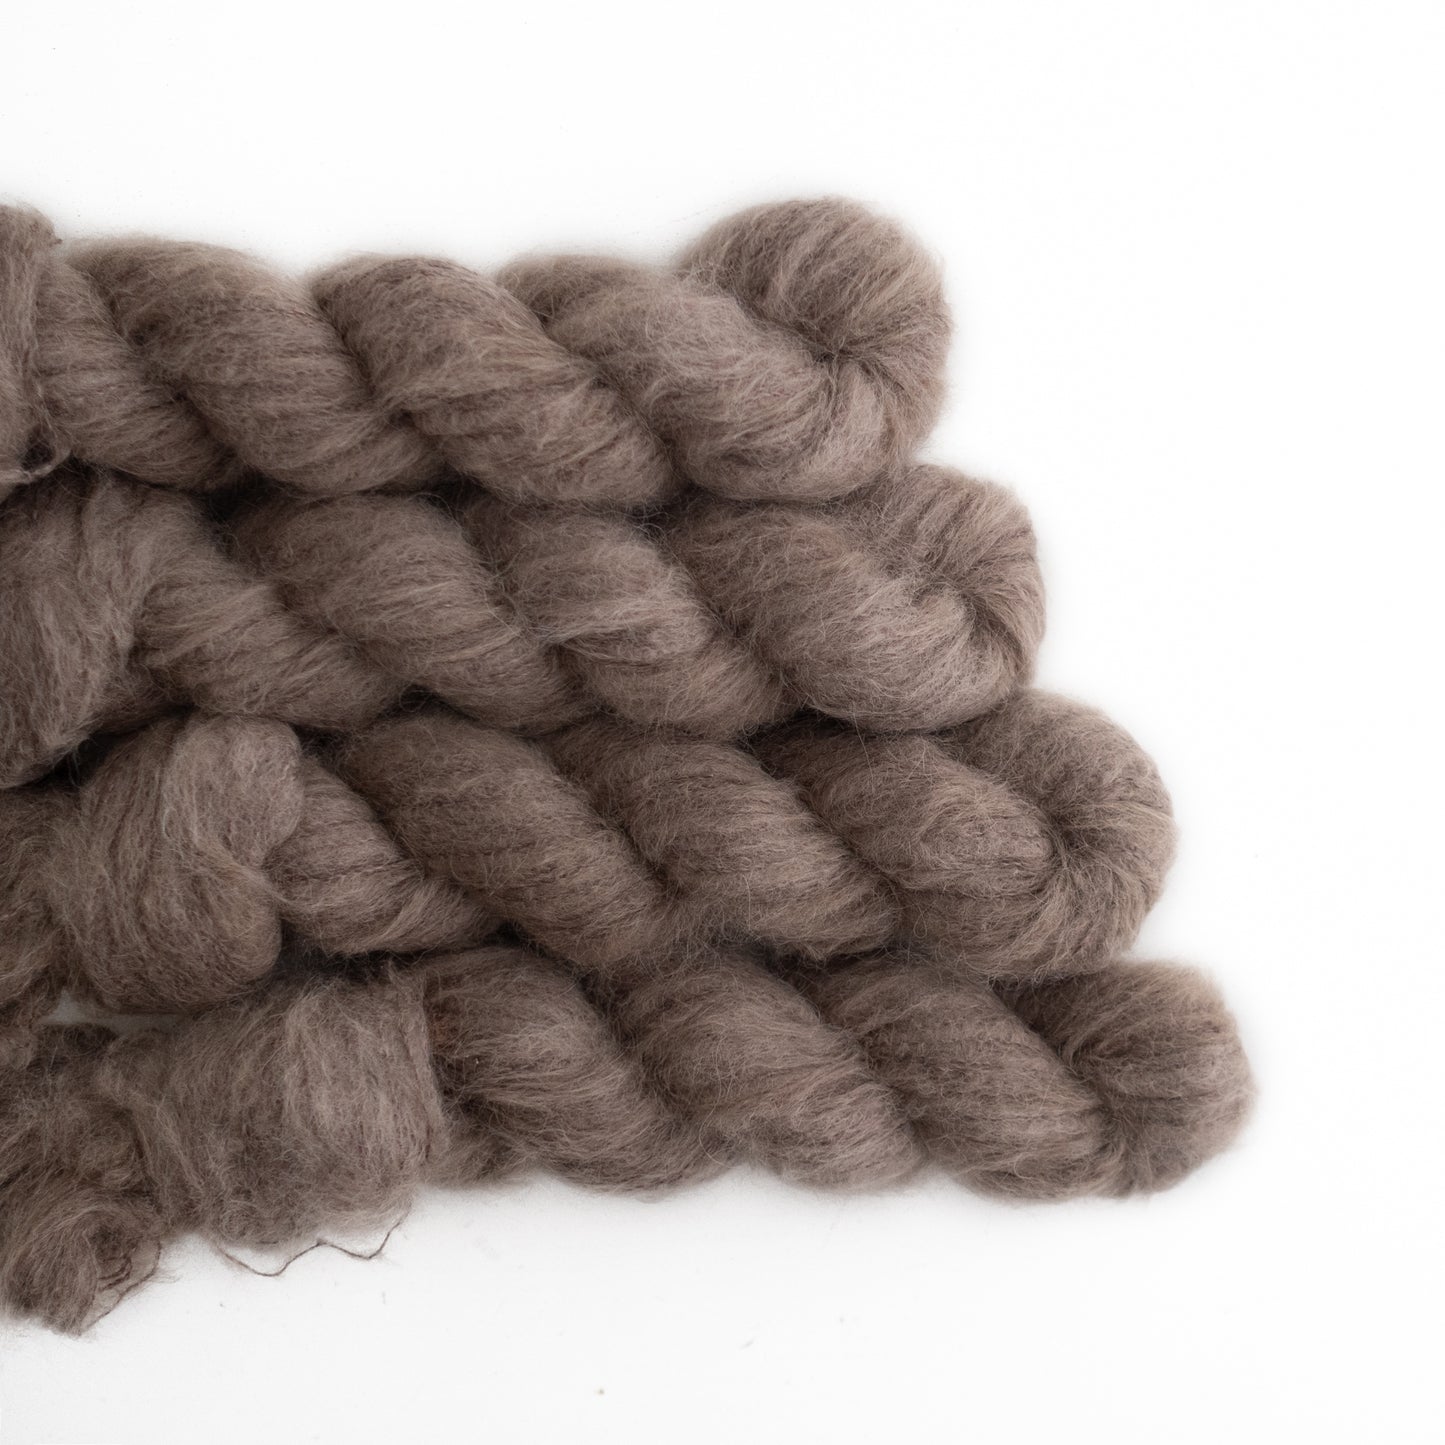 Cacao | Dyed To Order